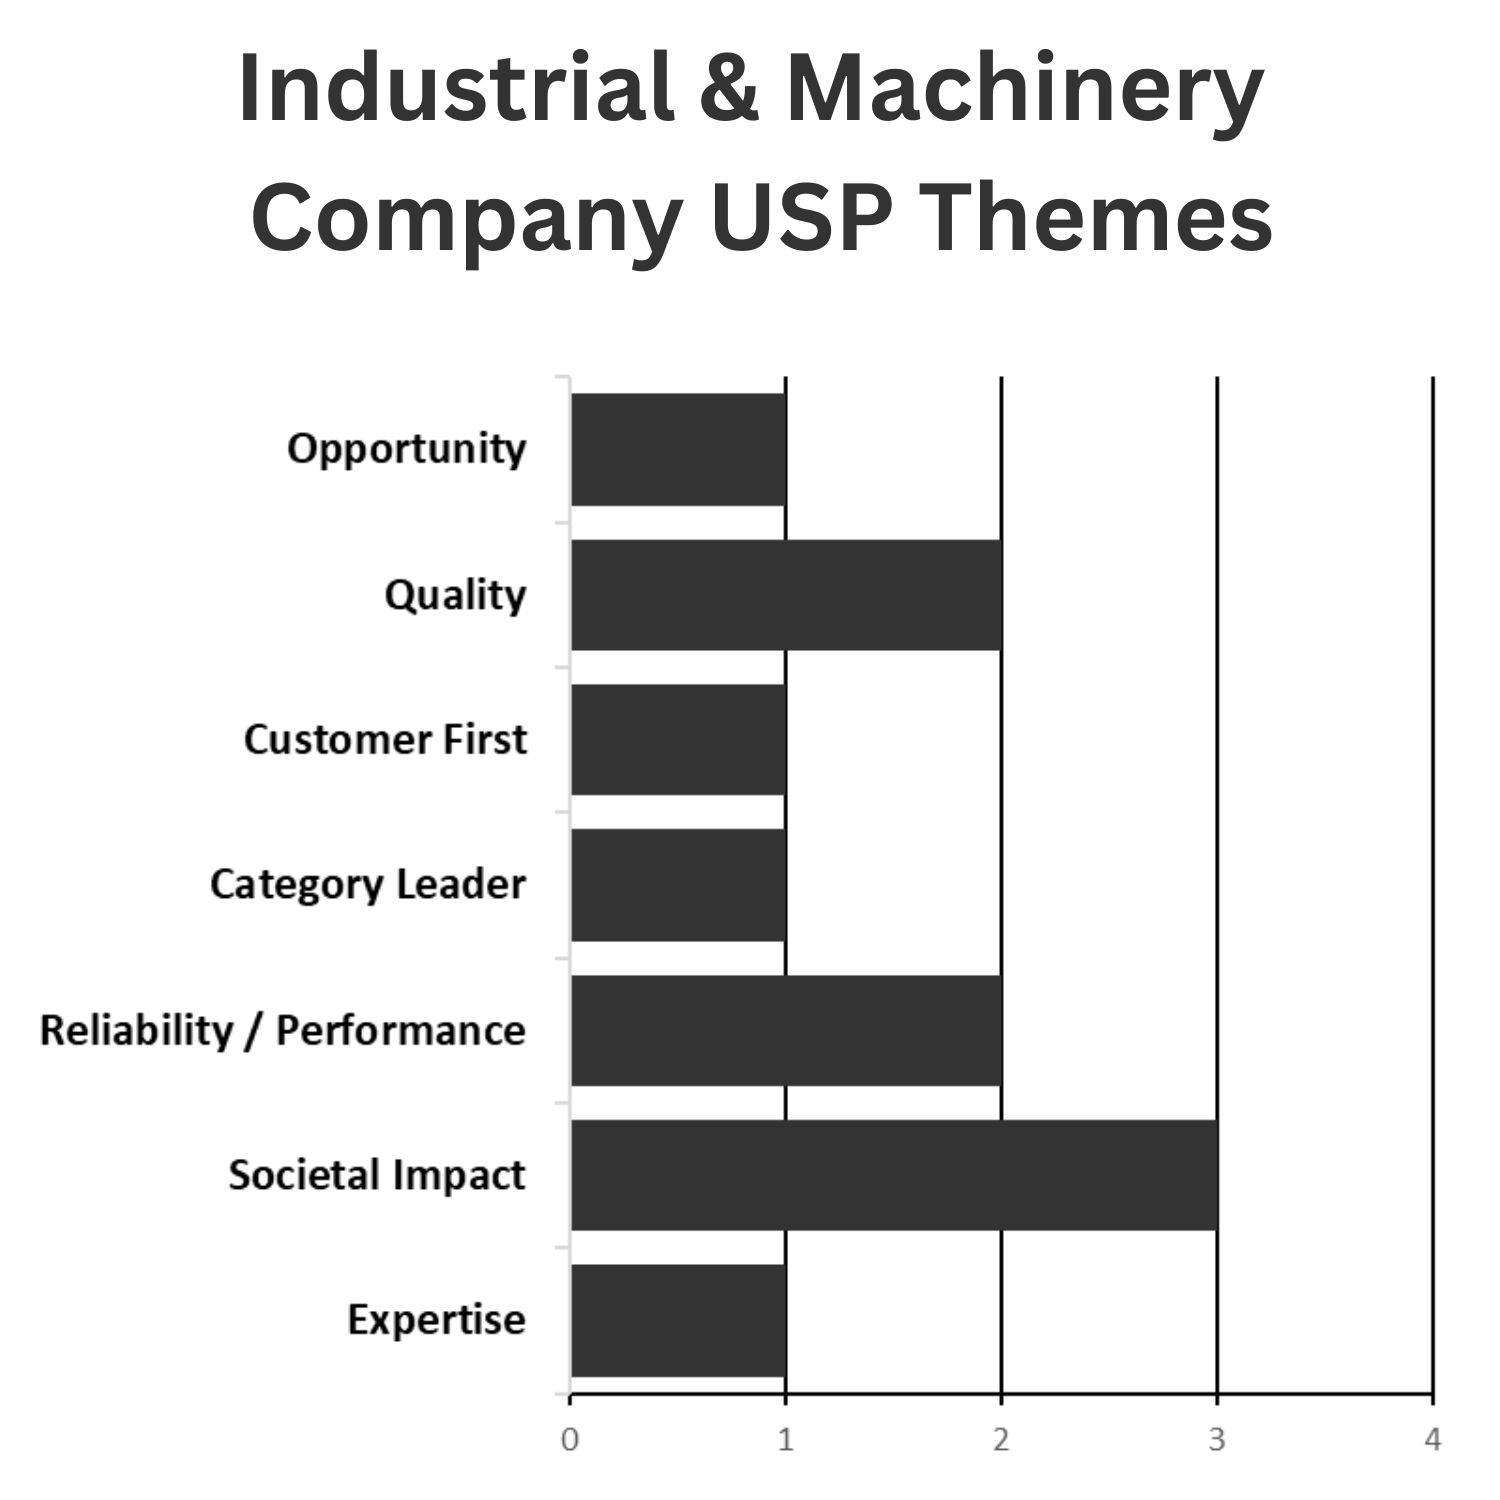 Industrial and Machinery Company USP Themes